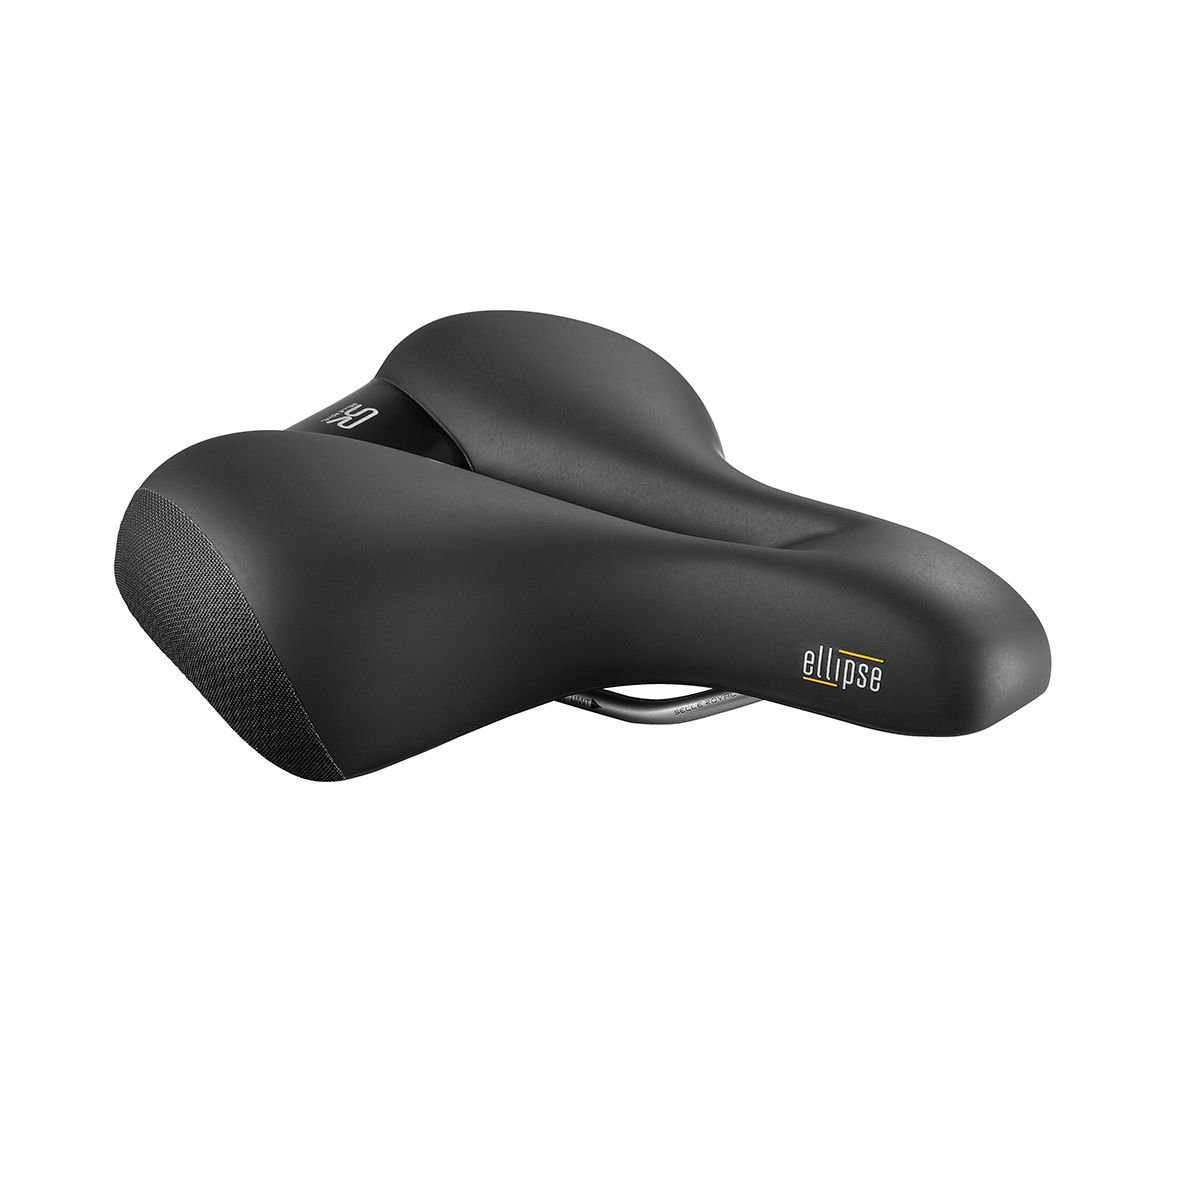 Седло Selle Royal Ellipse Relaxed, унисекс, 51B7UE0A09321 седло selle royal respiro soft relaxed